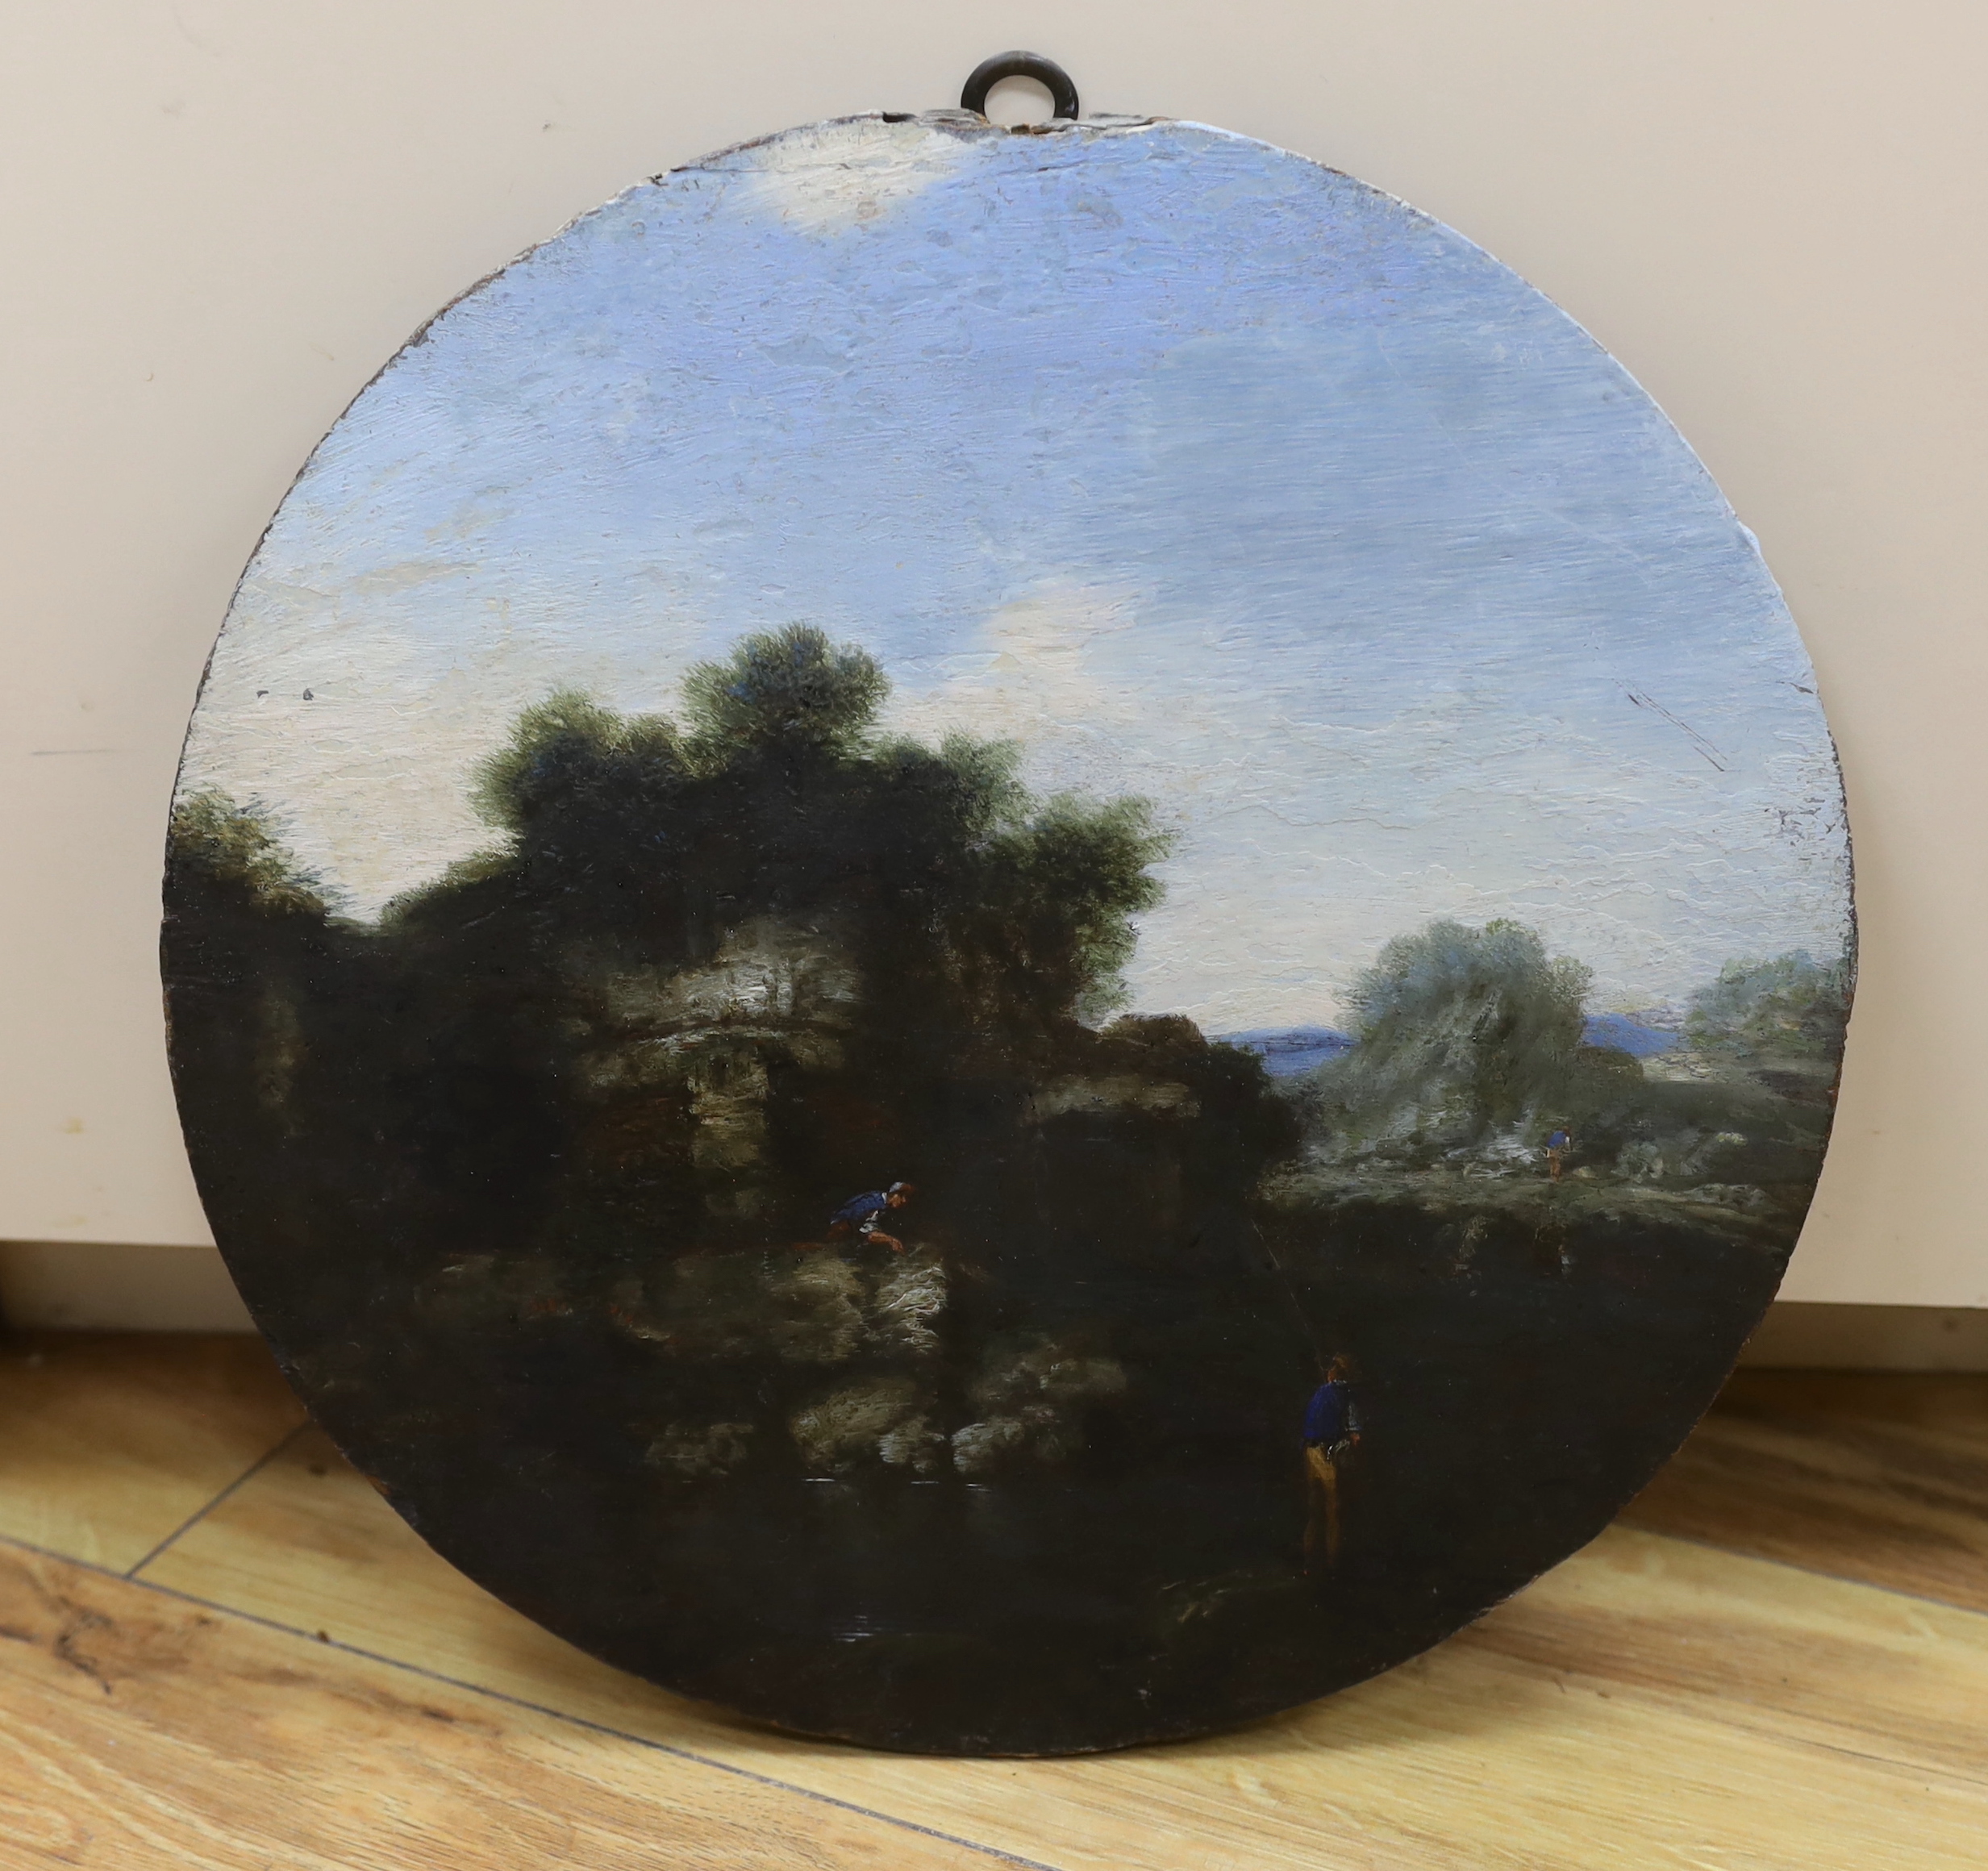 19th century English school, circular oil on wood panel, River landscape with figures fishing, unframed, 32cm in diameter